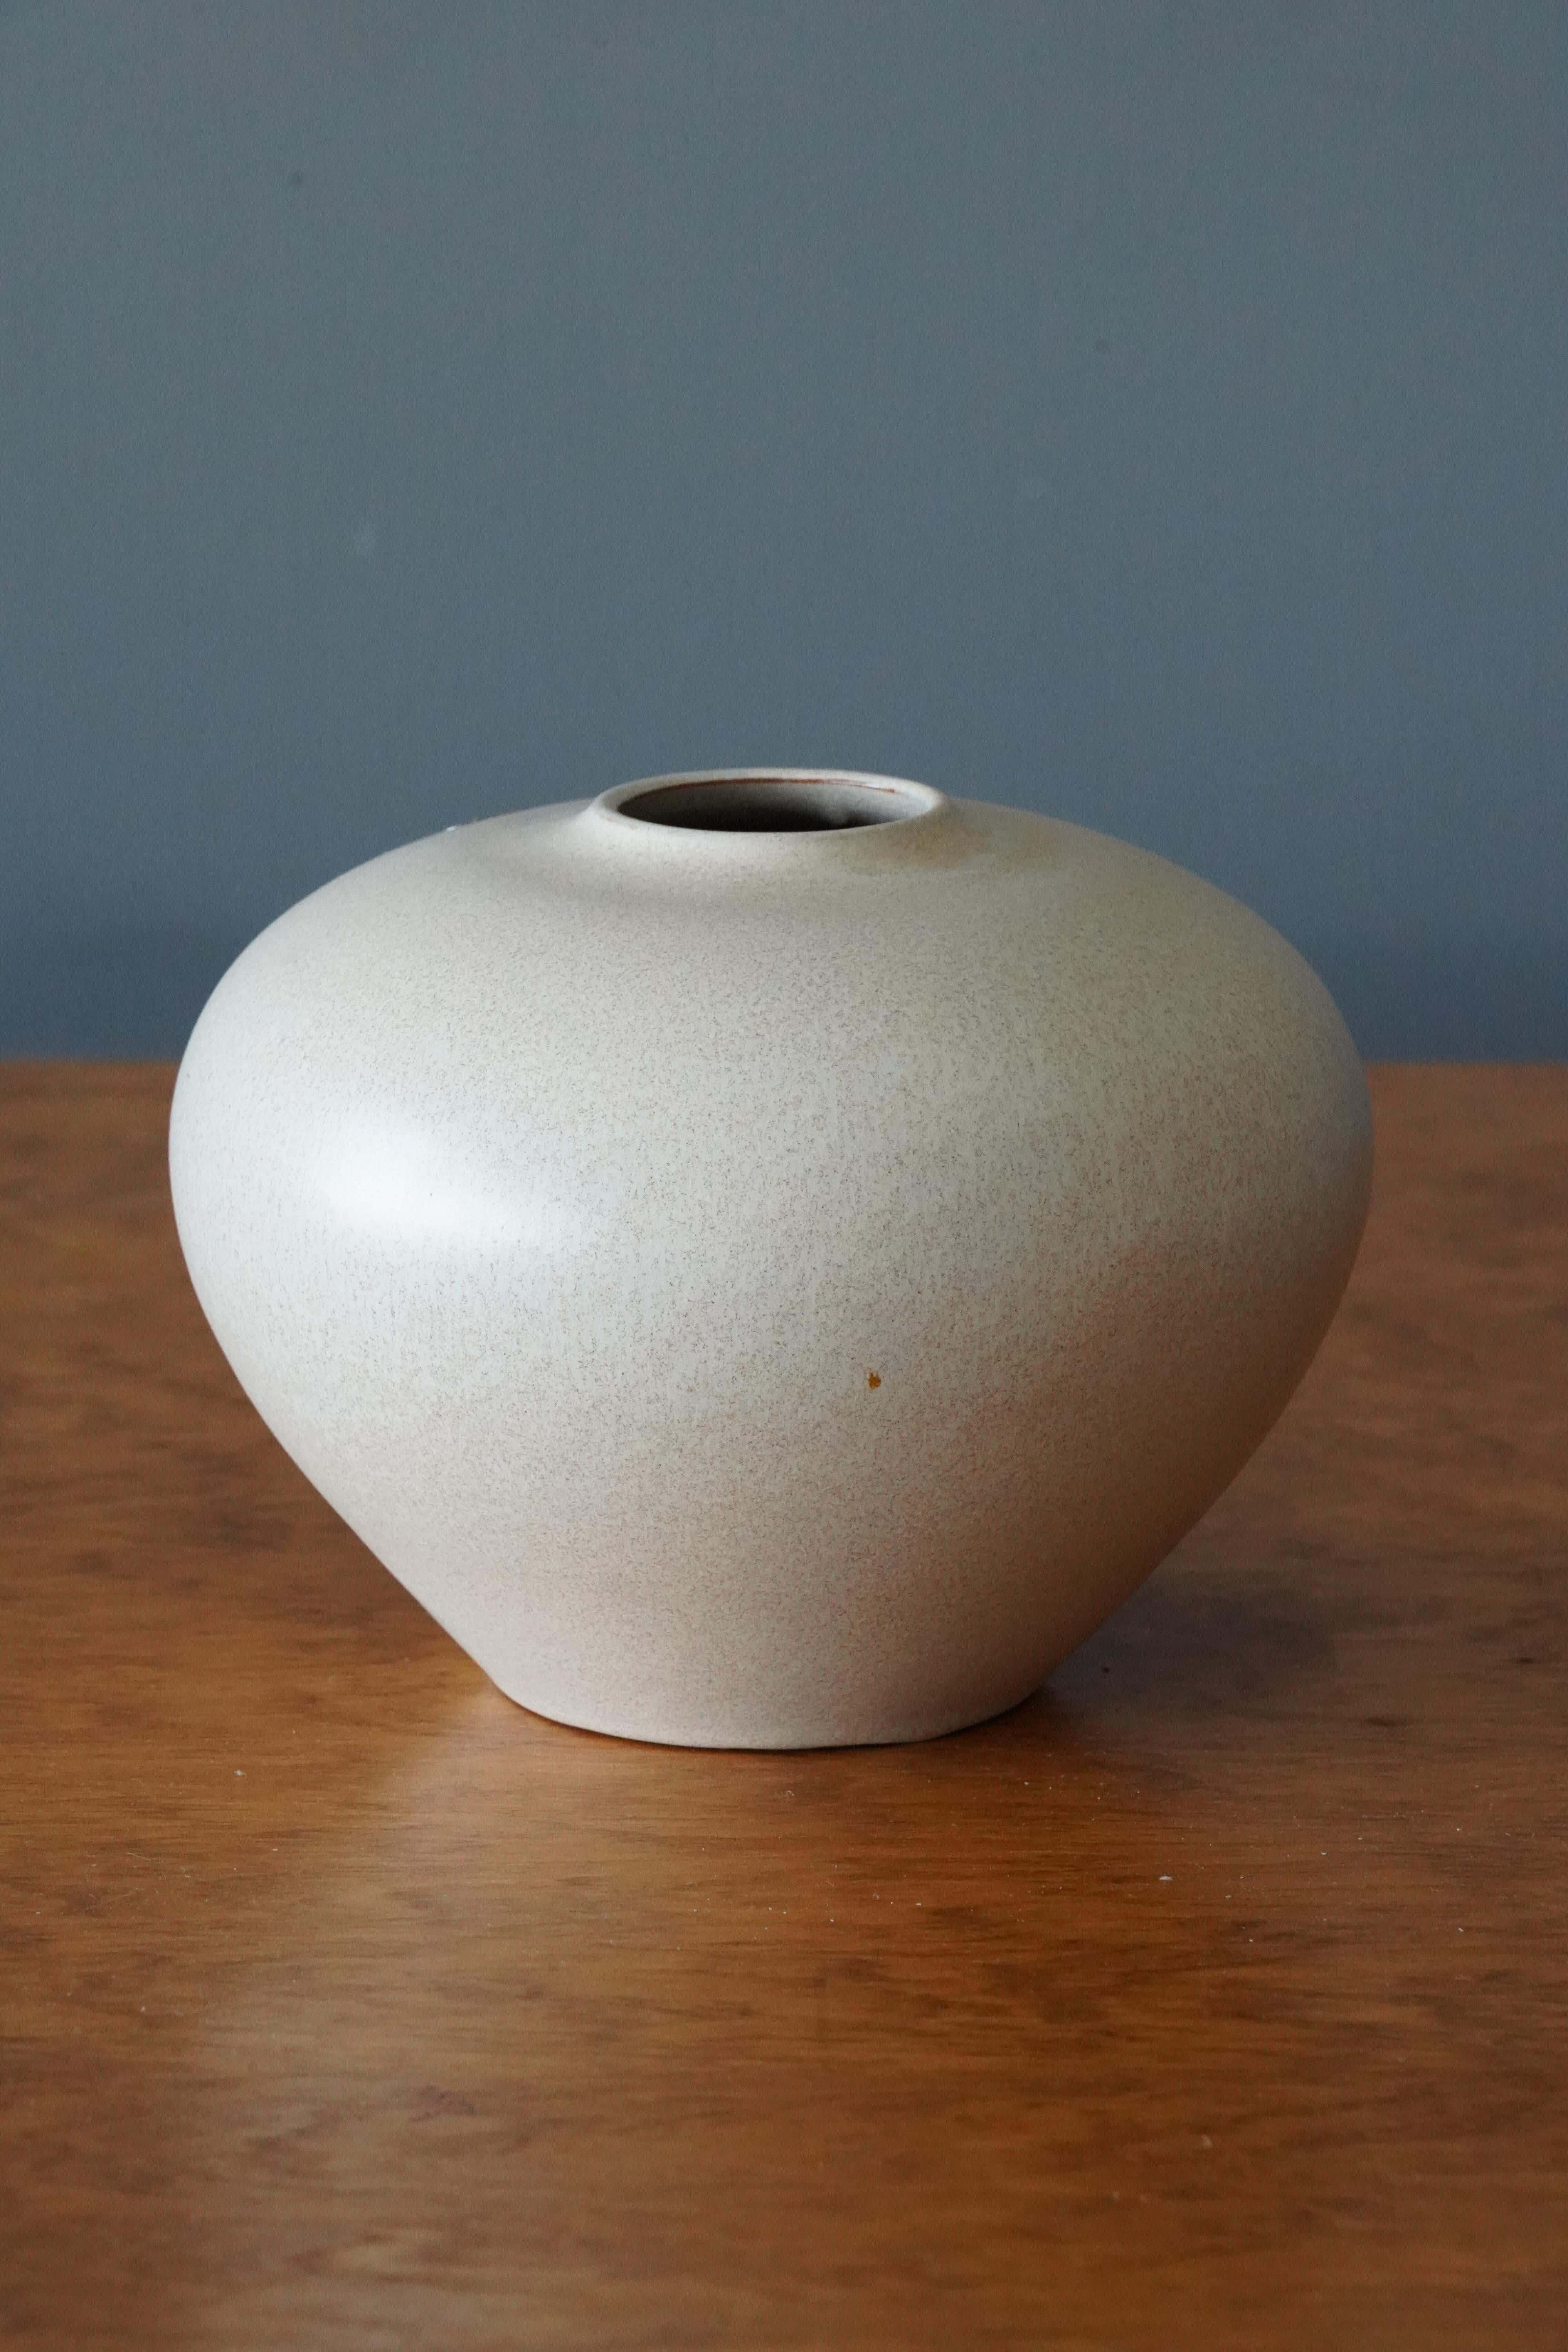 An early modernist vase. Designed by Anna-Lisa Thomson, for Upsala-Ekeby, Sweden, 1940s. Labeled.

Other designers of the period include Ettore Sottsass, Carl Harry Stålhane, Lisa Larsson, Axel Salto, and Arne Bang.